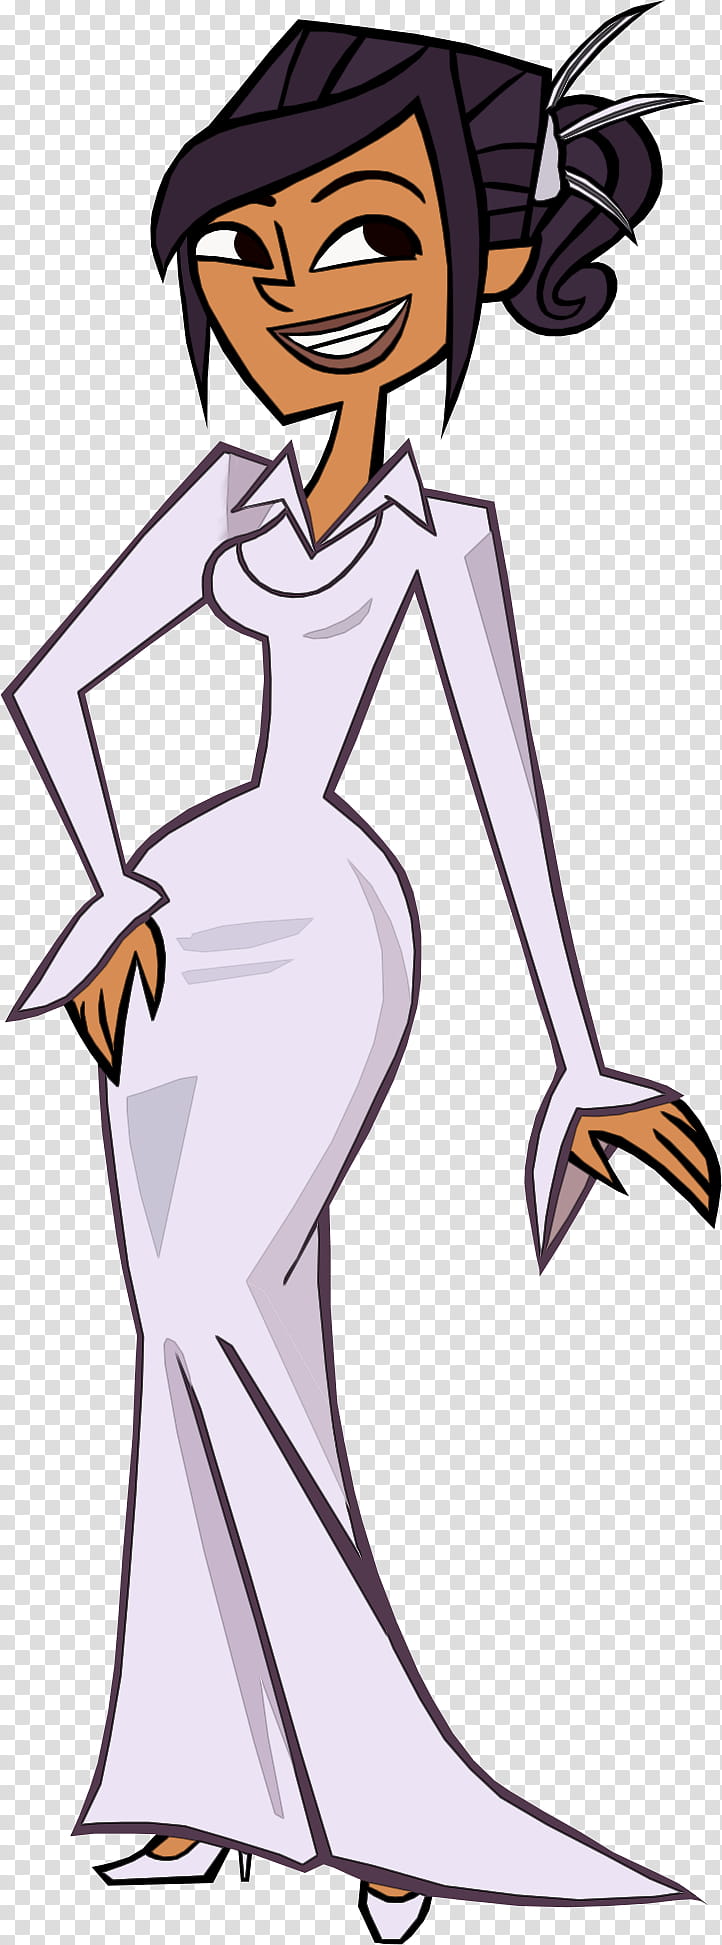 OHH I d look so good in that, girl wearing white dress cartoon character ] transparent background PNG clipart